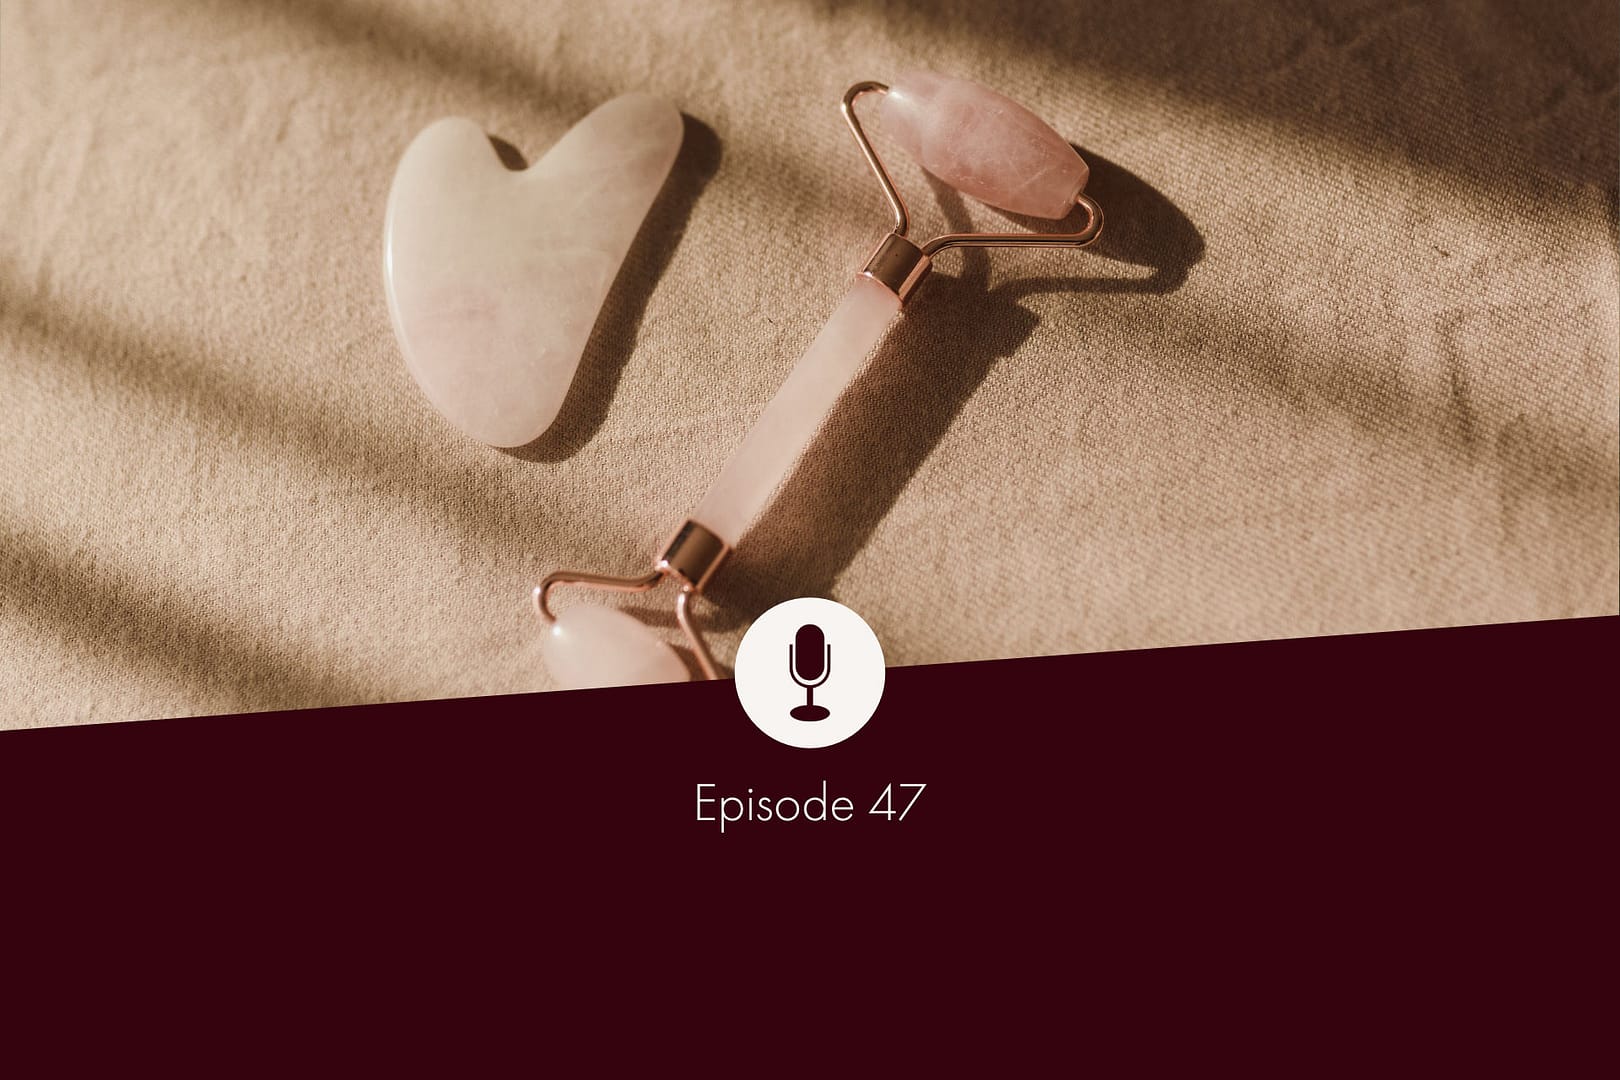 Photo of Gua Sha roller and Gua Sha stone (Chinese facial massage accessories) made of rose quartz on a beige linen cloth